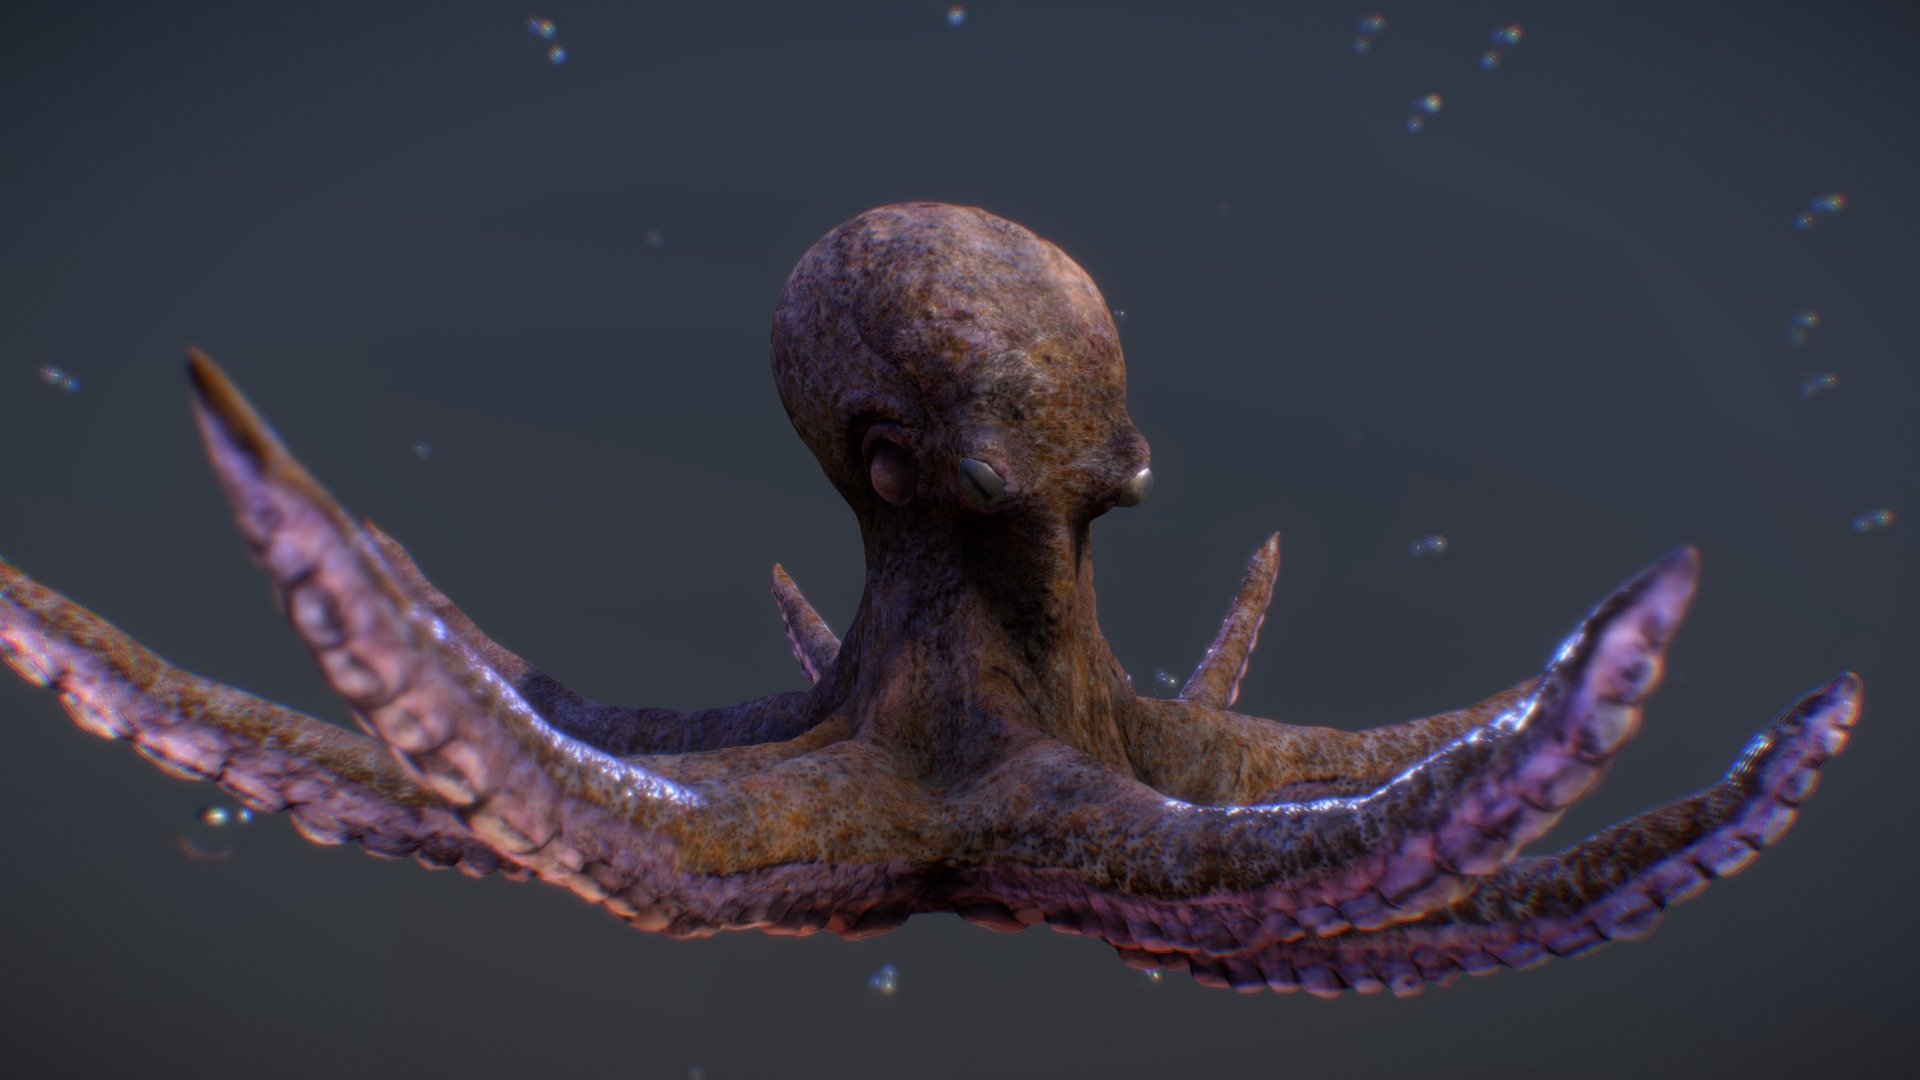 Nothing special, just a swimming octopus, made for practice, portfolio and selling.

Programs used:

Sculptris
Blender
Zbrush
Photoshop

Music: Stranger Things Season 3 Original Soundtrack - Rats - Swimming Octopus - Buy Royalty Free 3D model by Bence Monori (@benmonor) 3d model